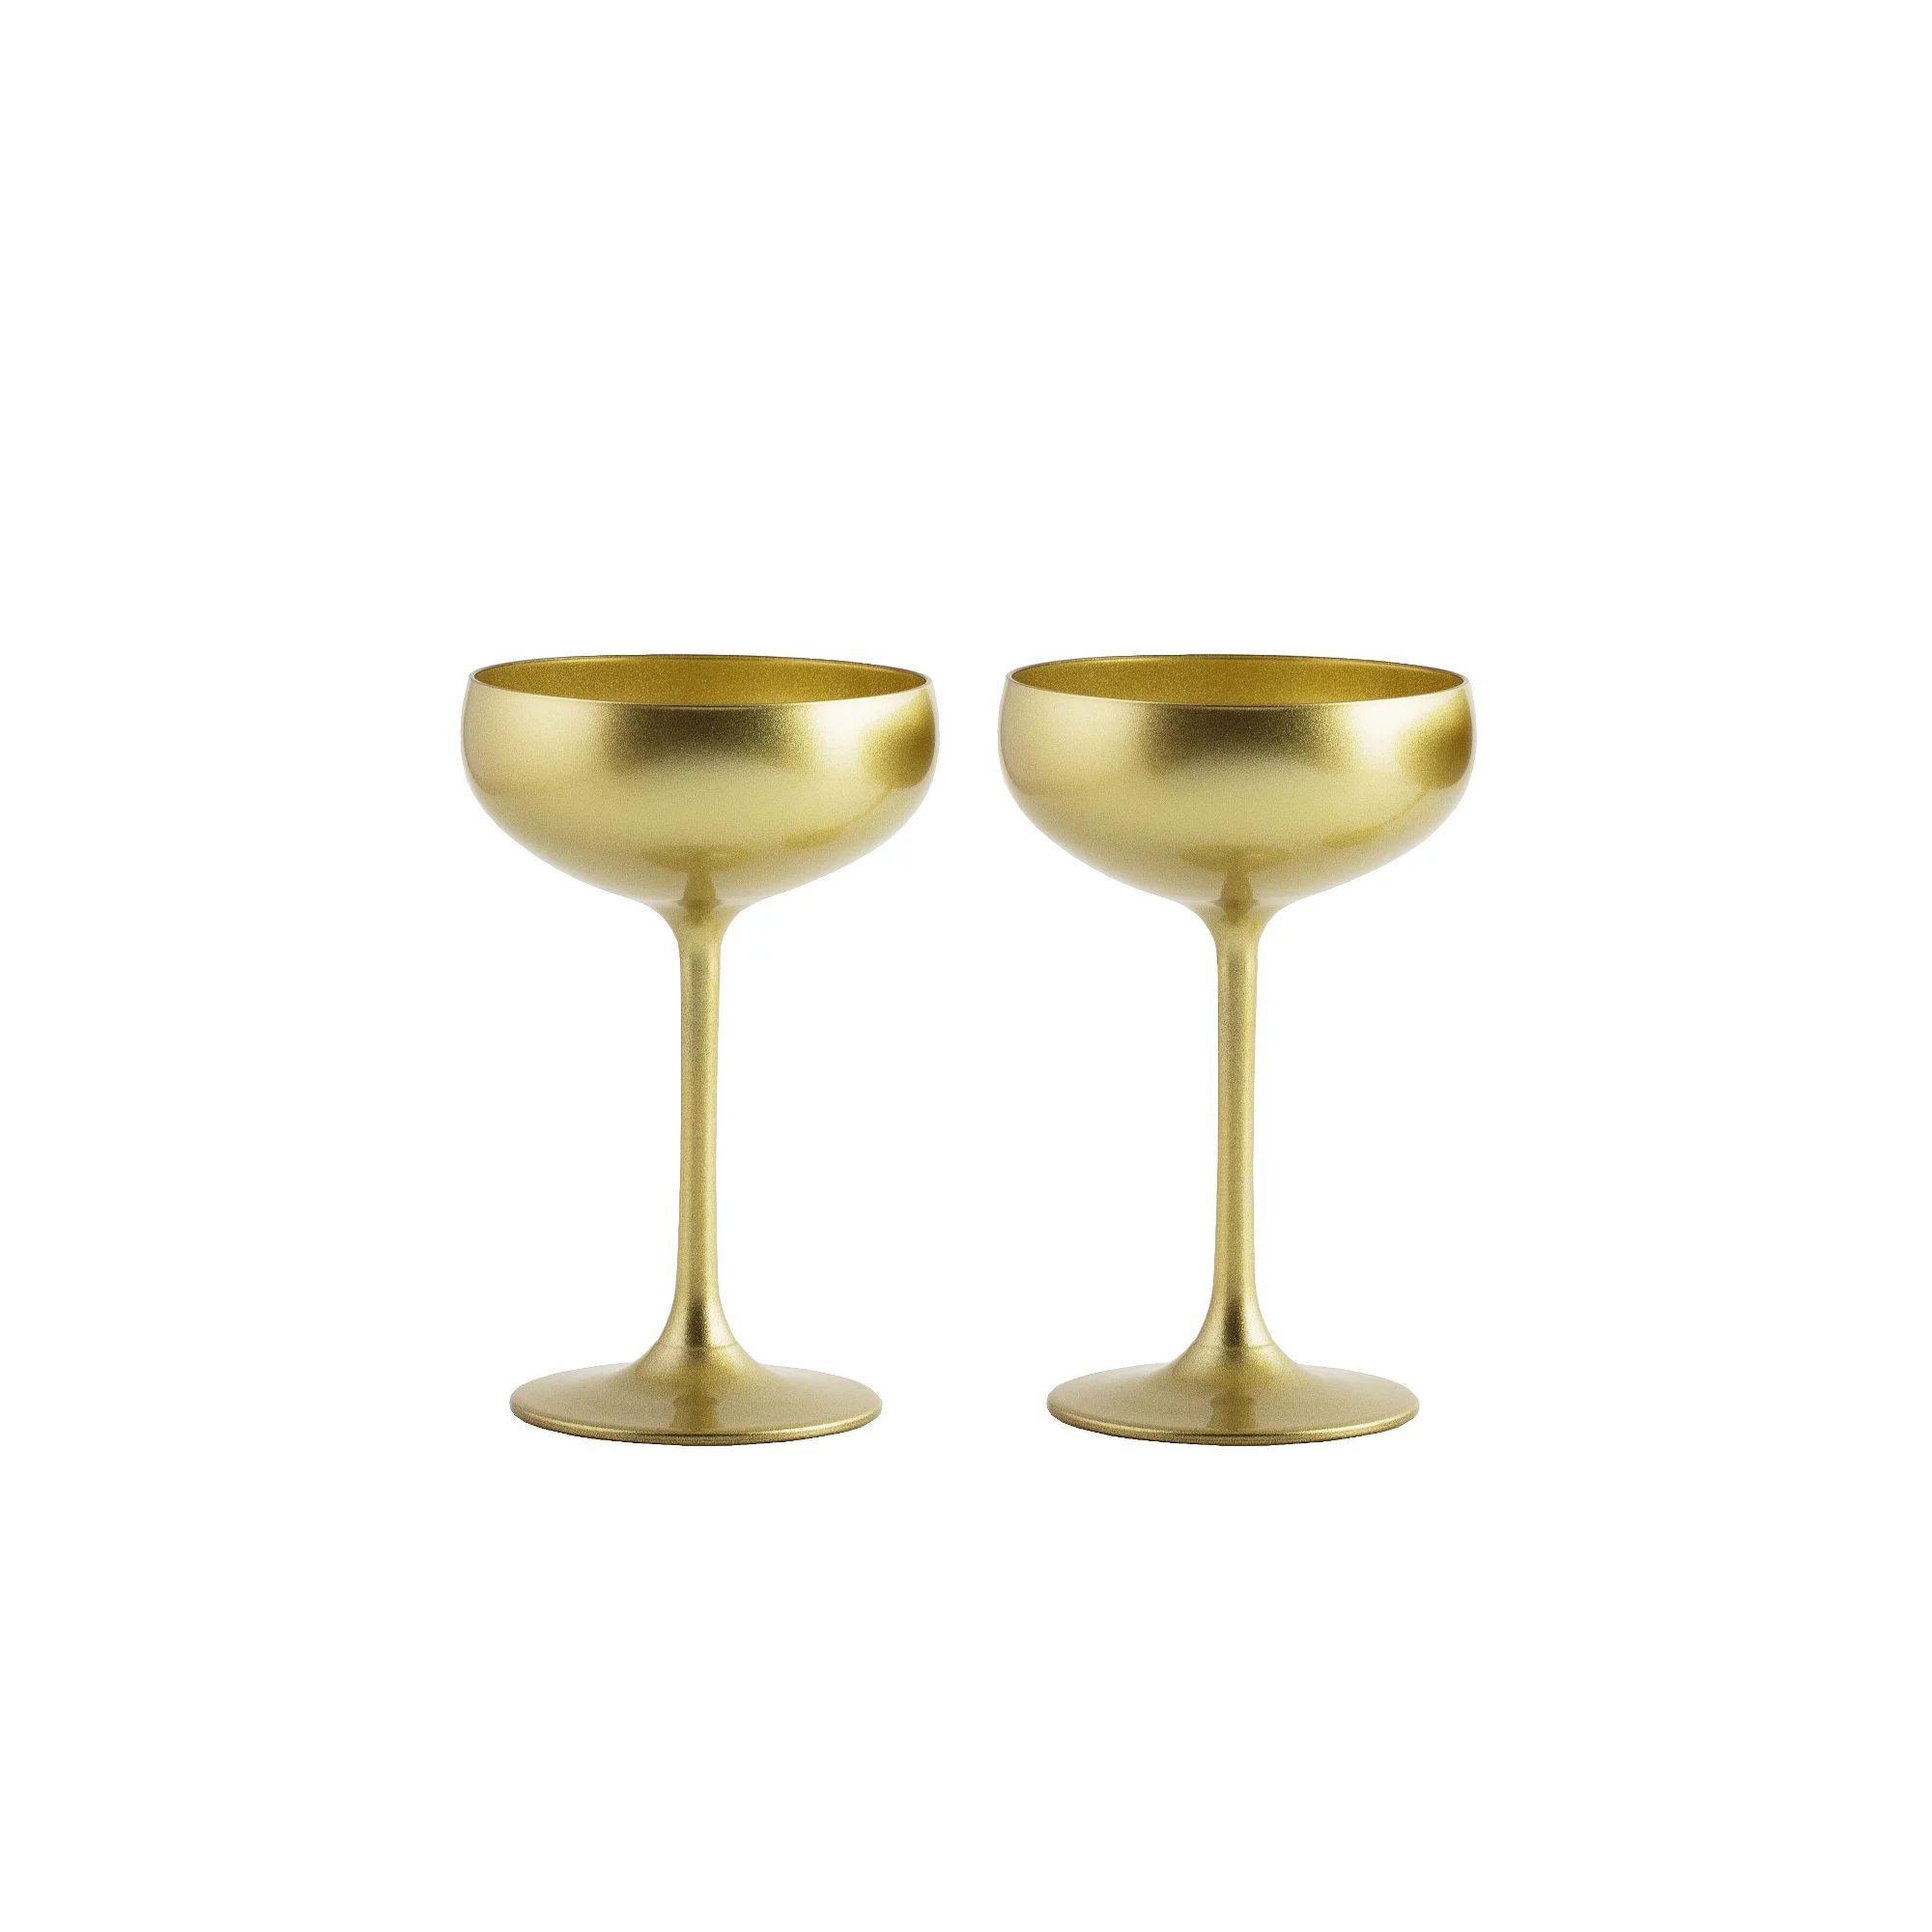 Stolzle Lausitz Olympia German Made Gold Champagne Saucer Coupe Glass, Set of 2 | Walmart (US)